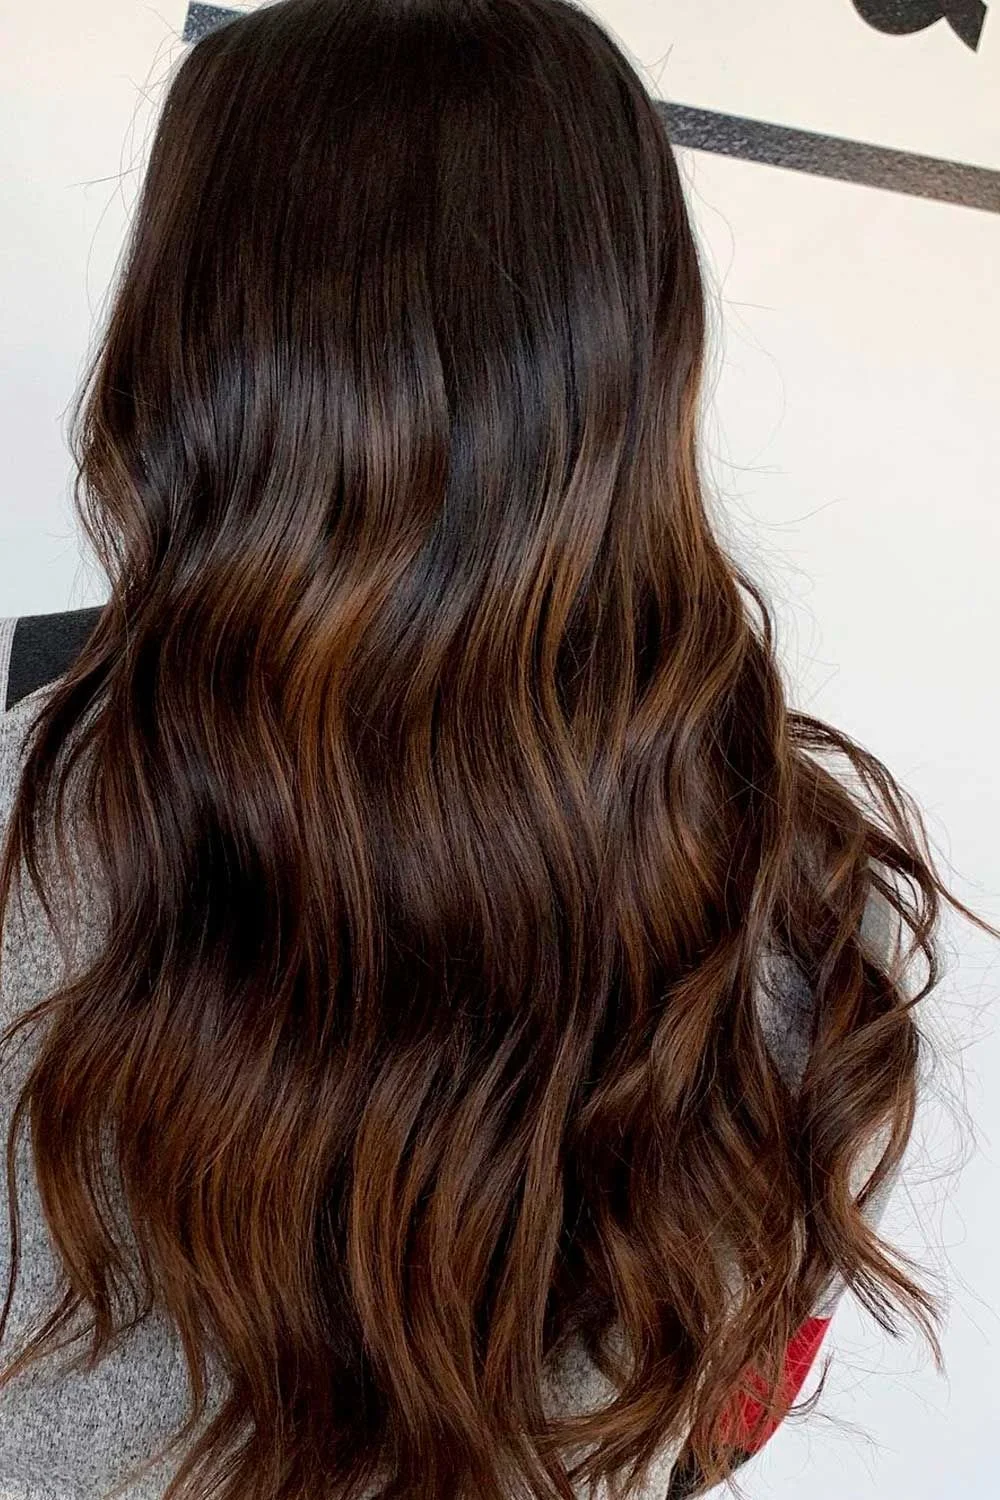 dark-brown-hair-color-idea-long-curly-with-honey-highlights